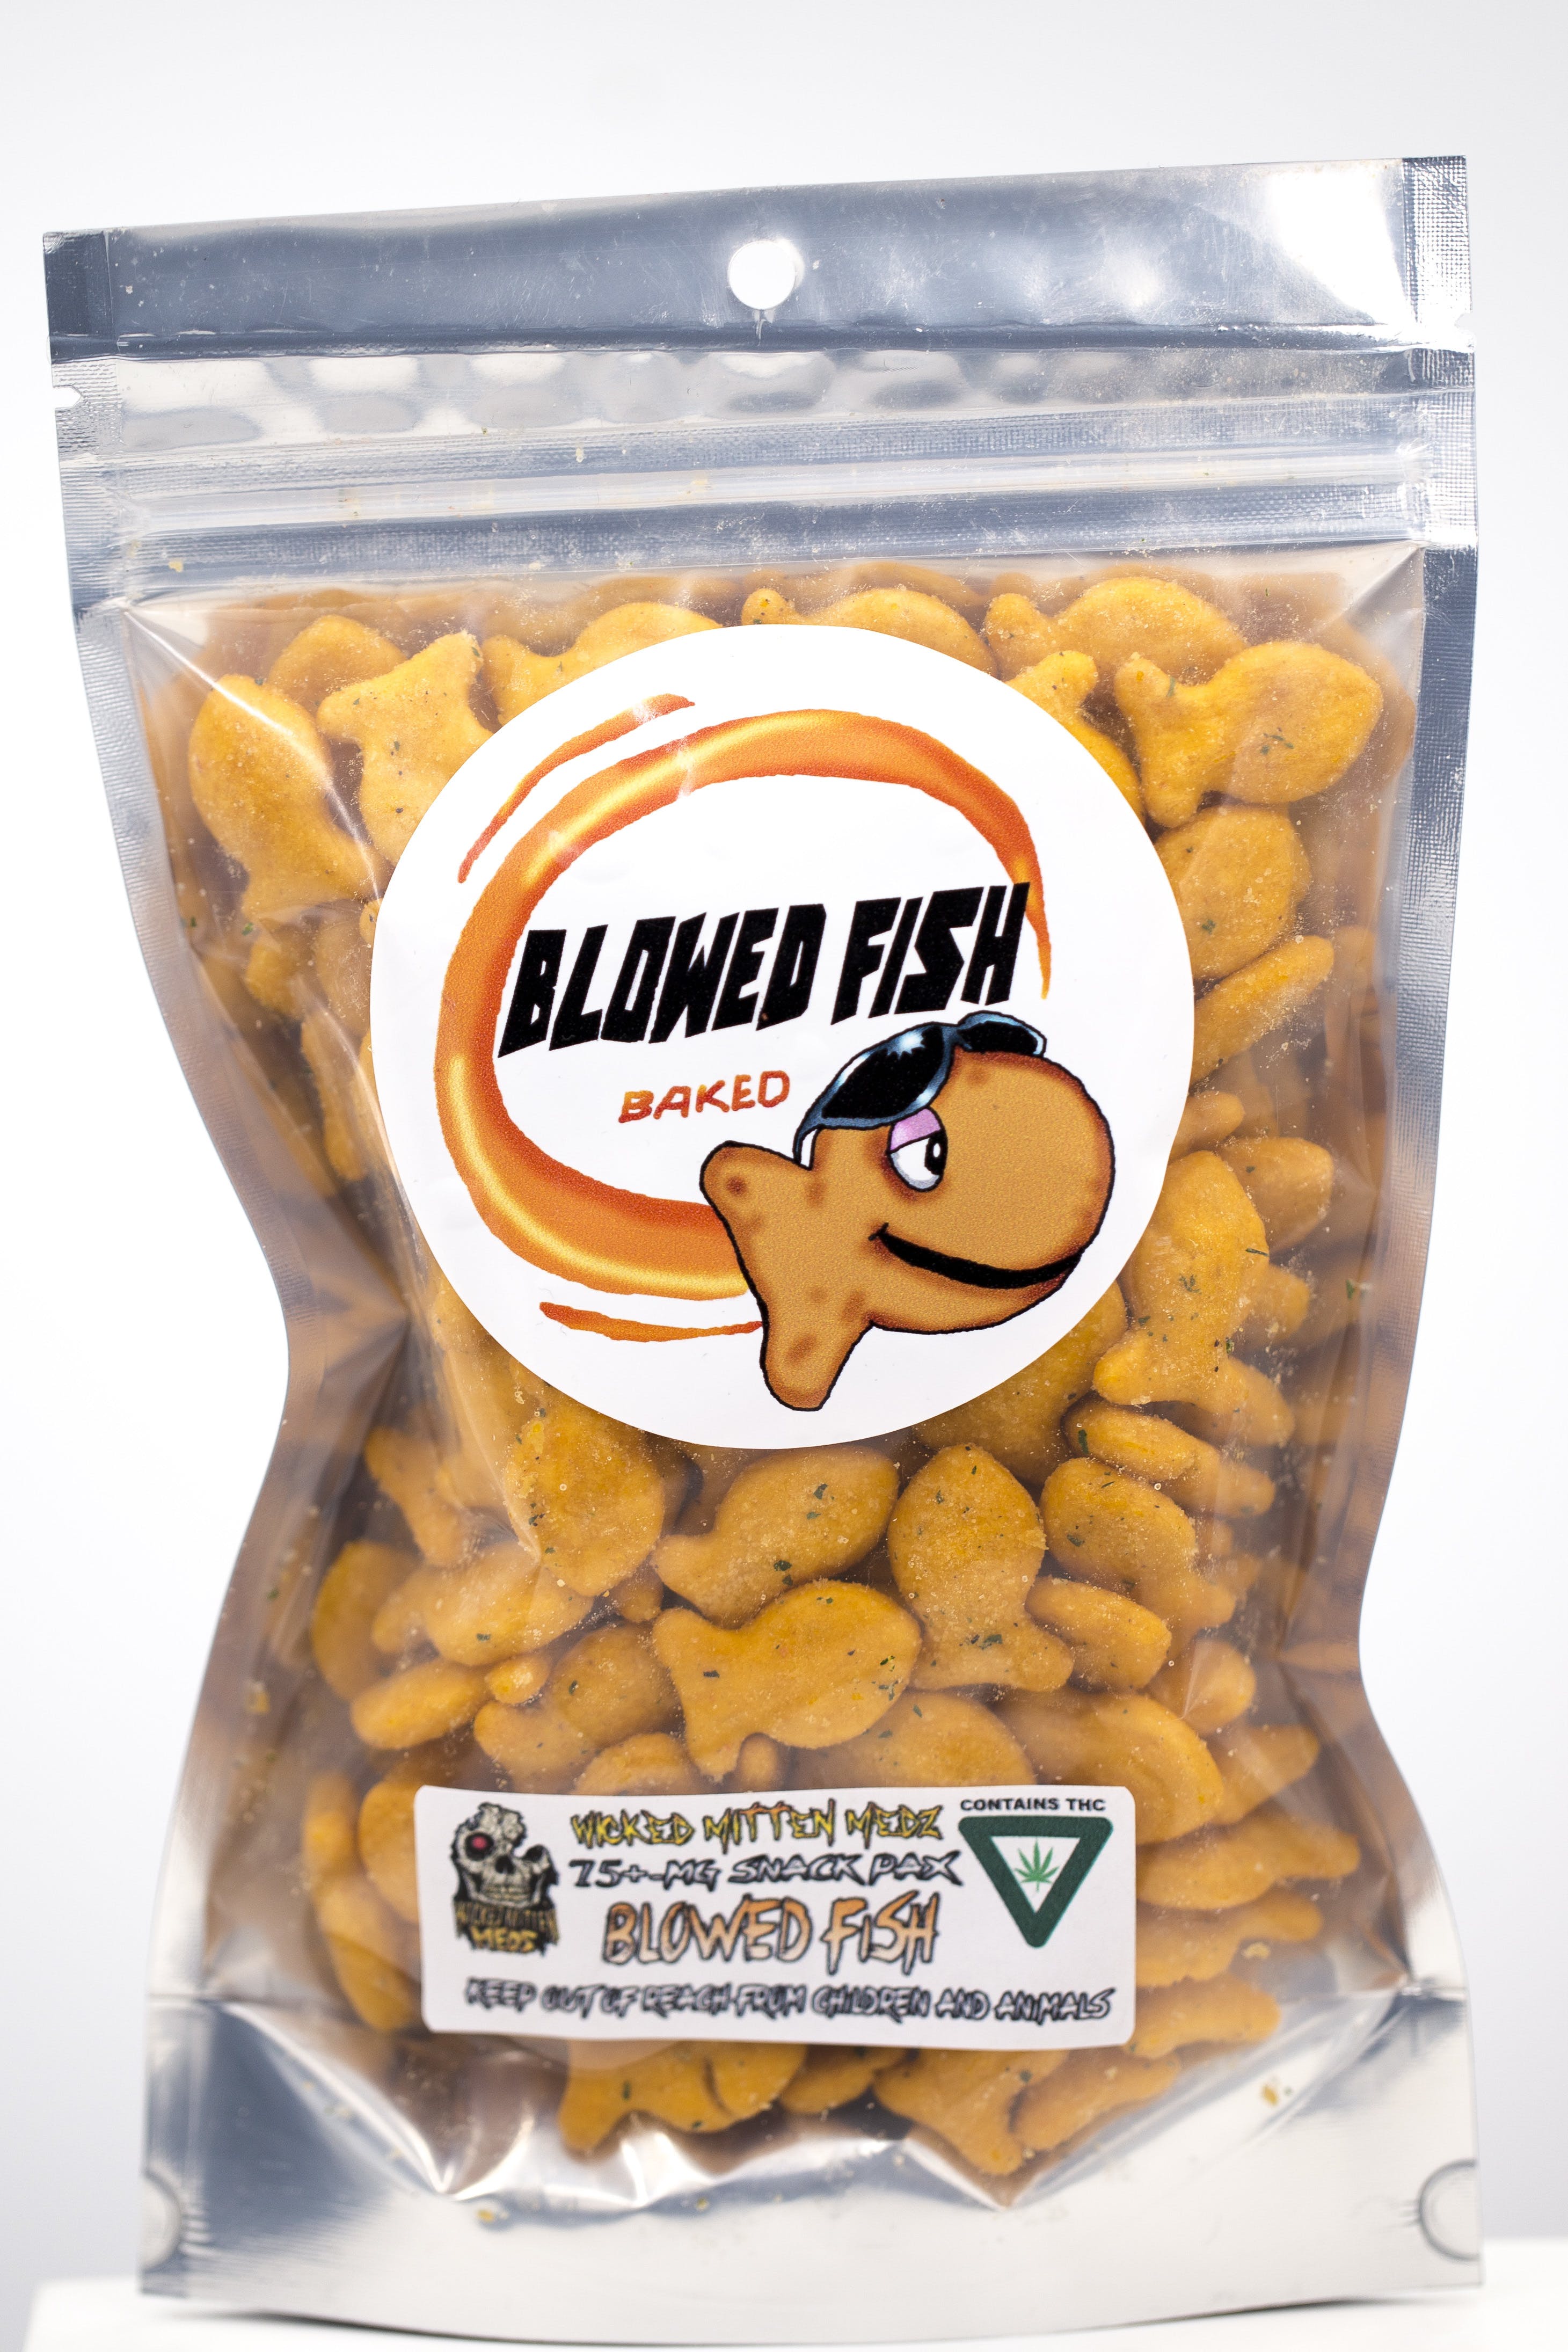 edible-blowed-fish-baked-75mg-by-wicked-mitten-medz